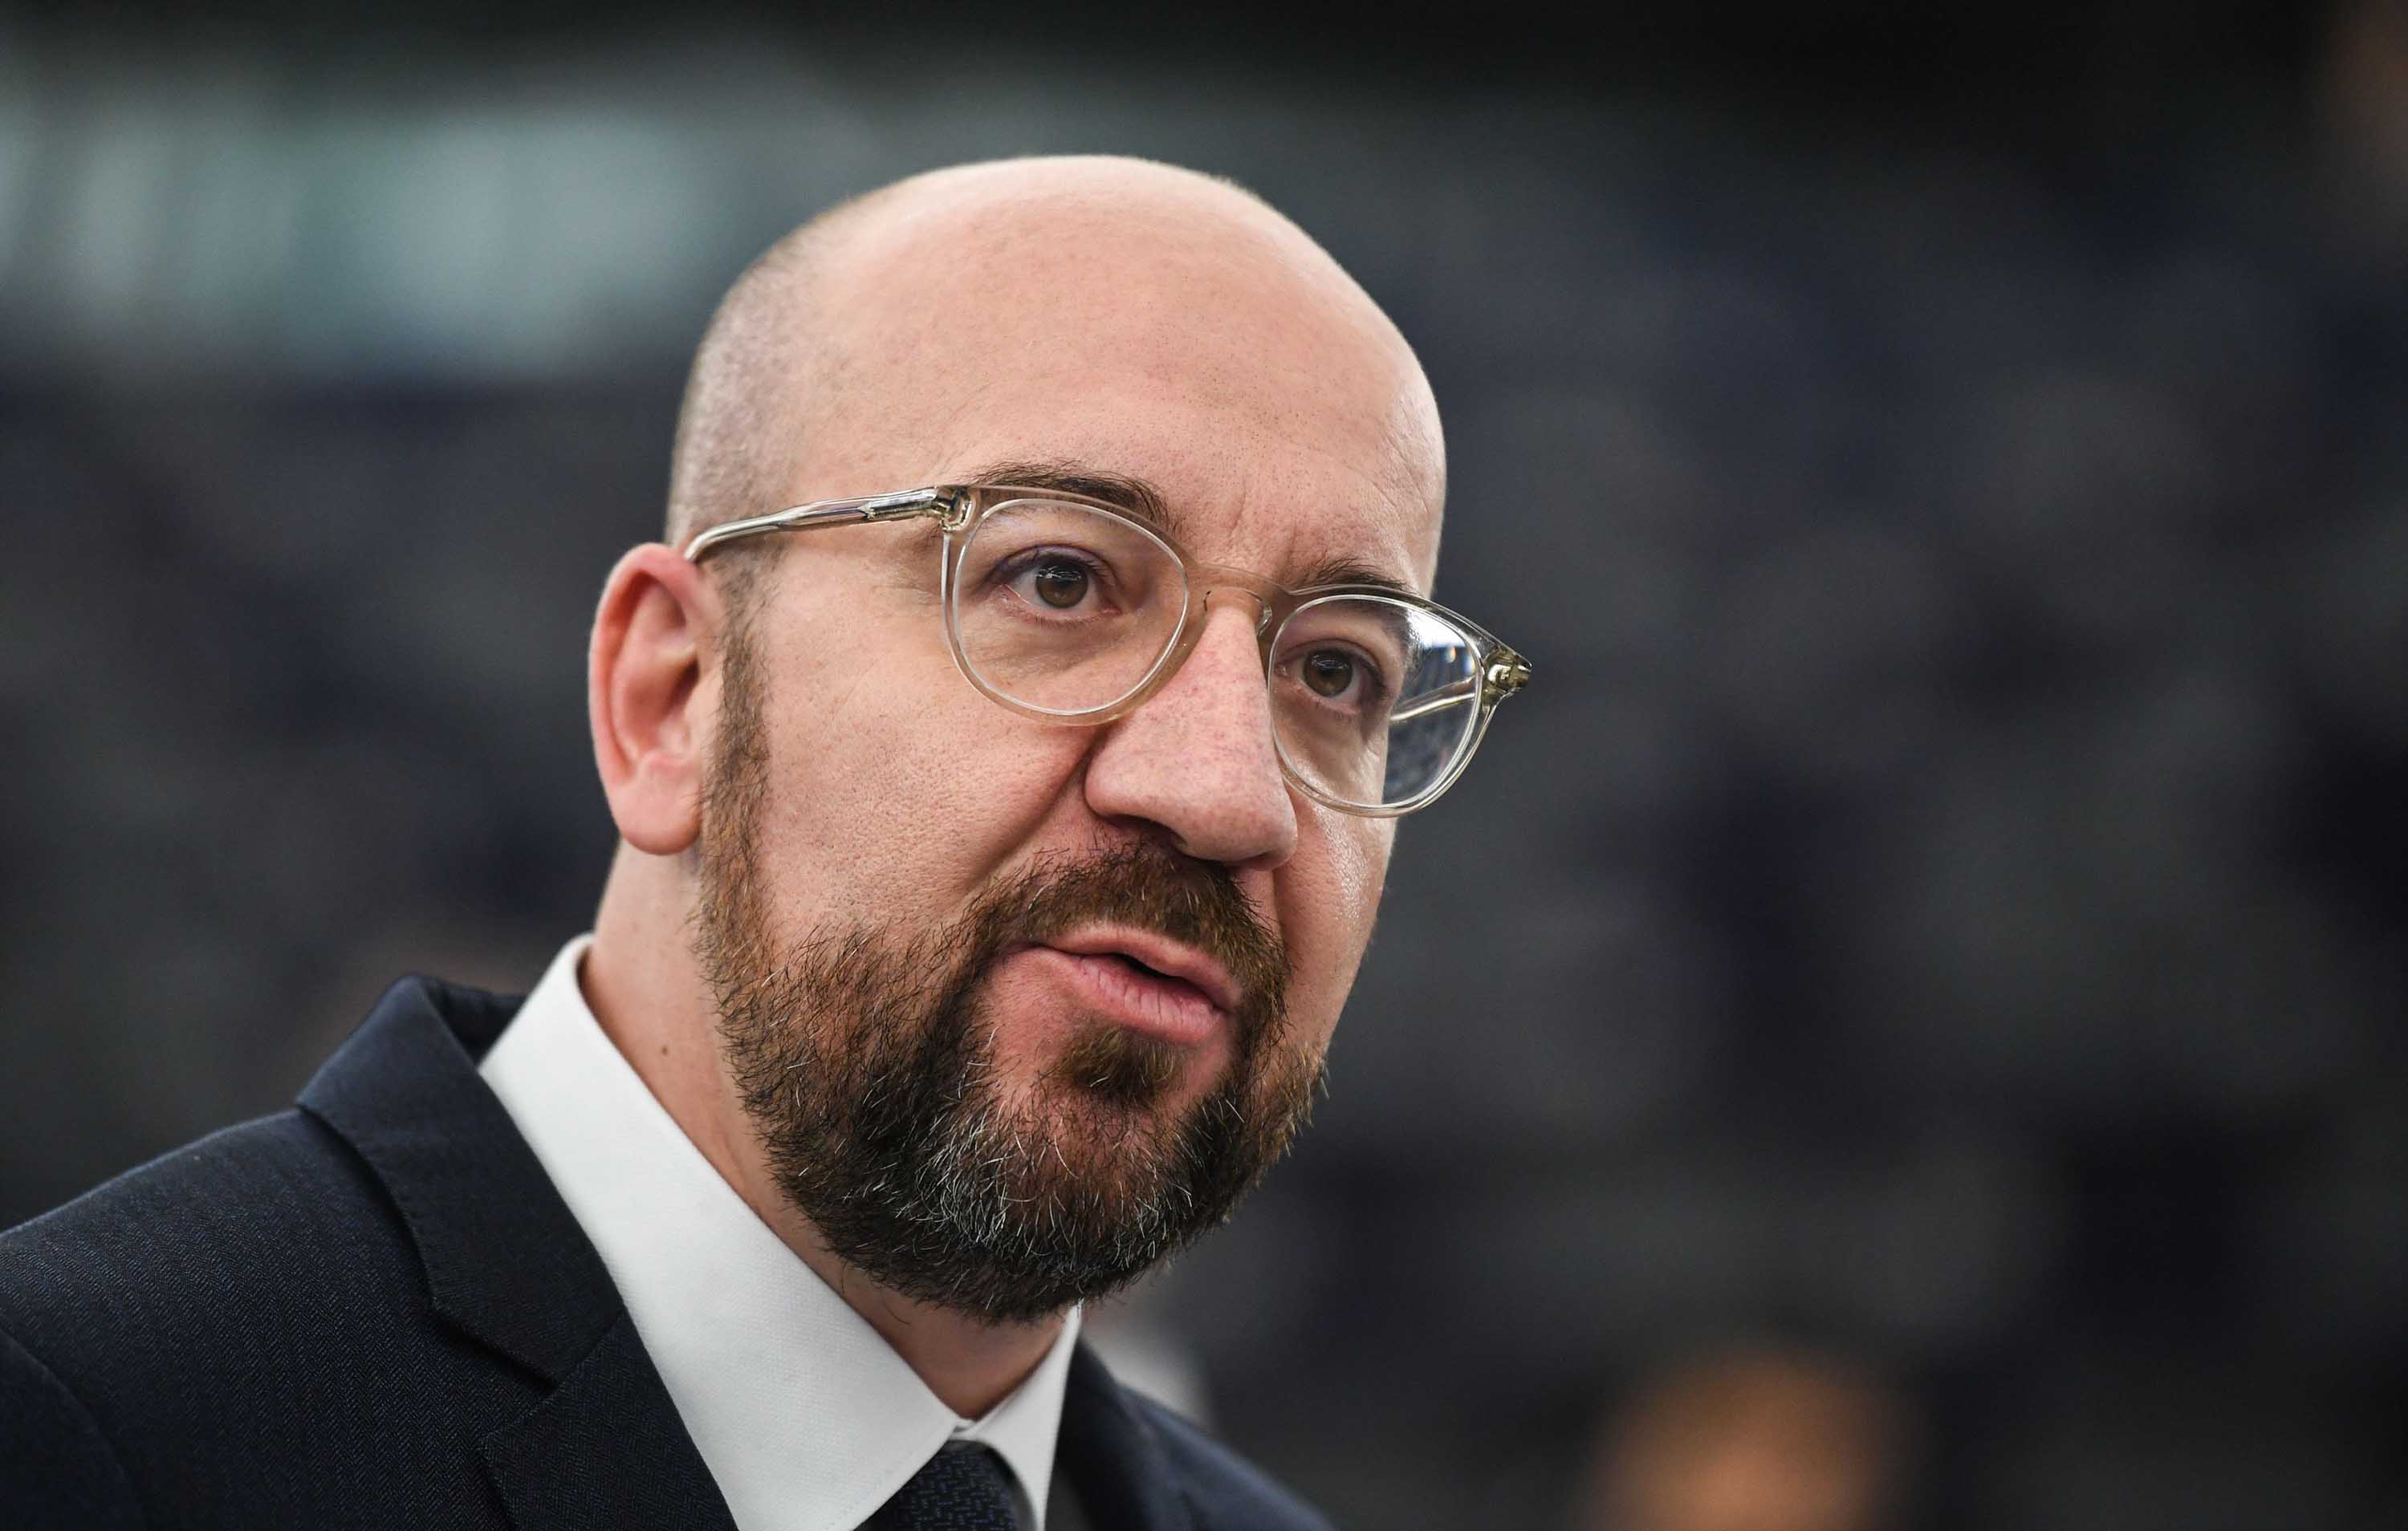 European Council President Charles Michel speaks during a debate at the European Parliament in Strasbourg, France in December.